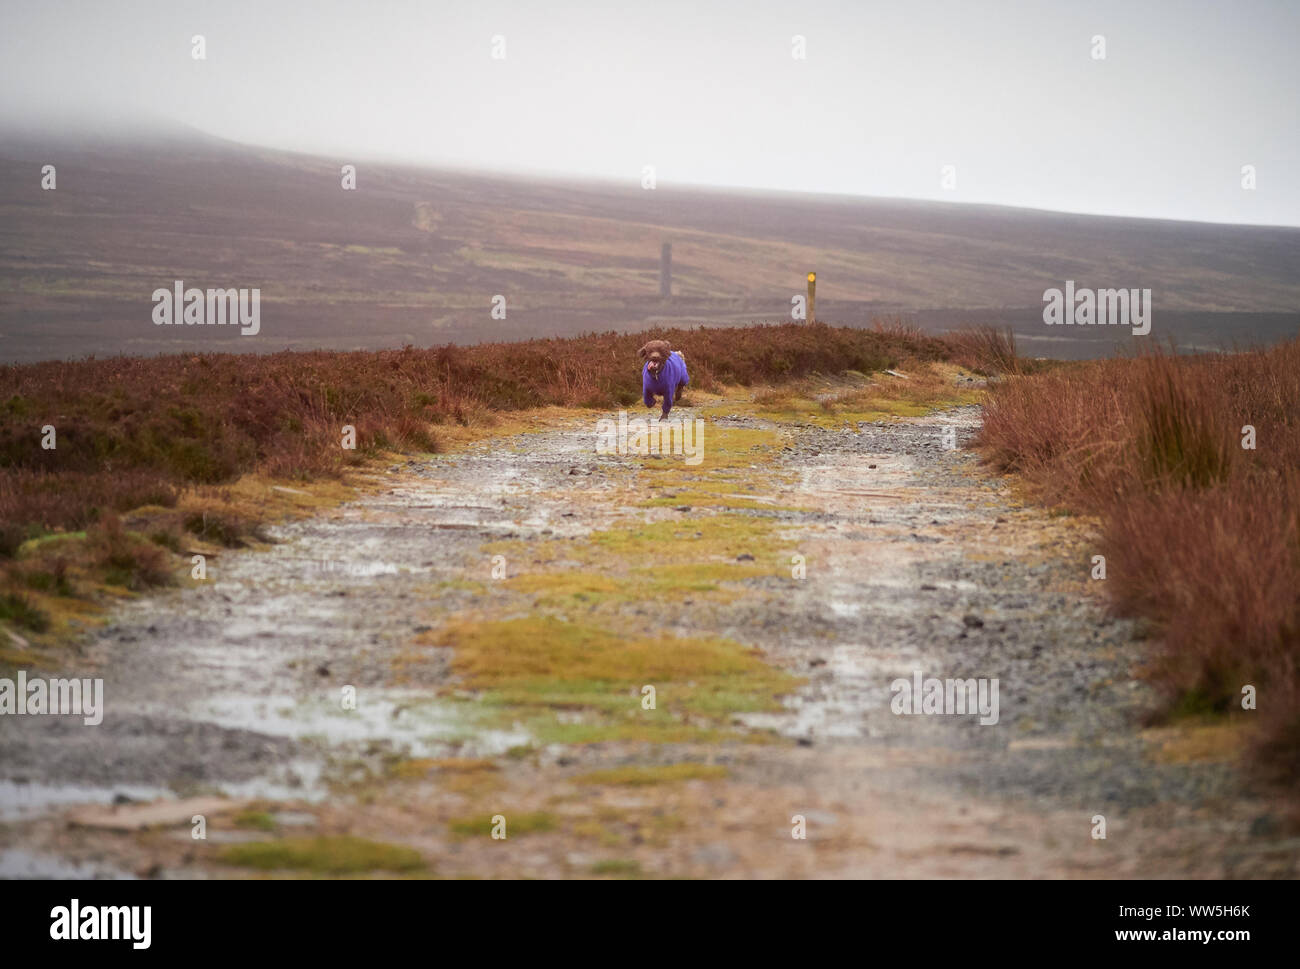 A miniature poodle sprinting down a dirt track on a wet autumn, winters day in England, UK. Stock Photo